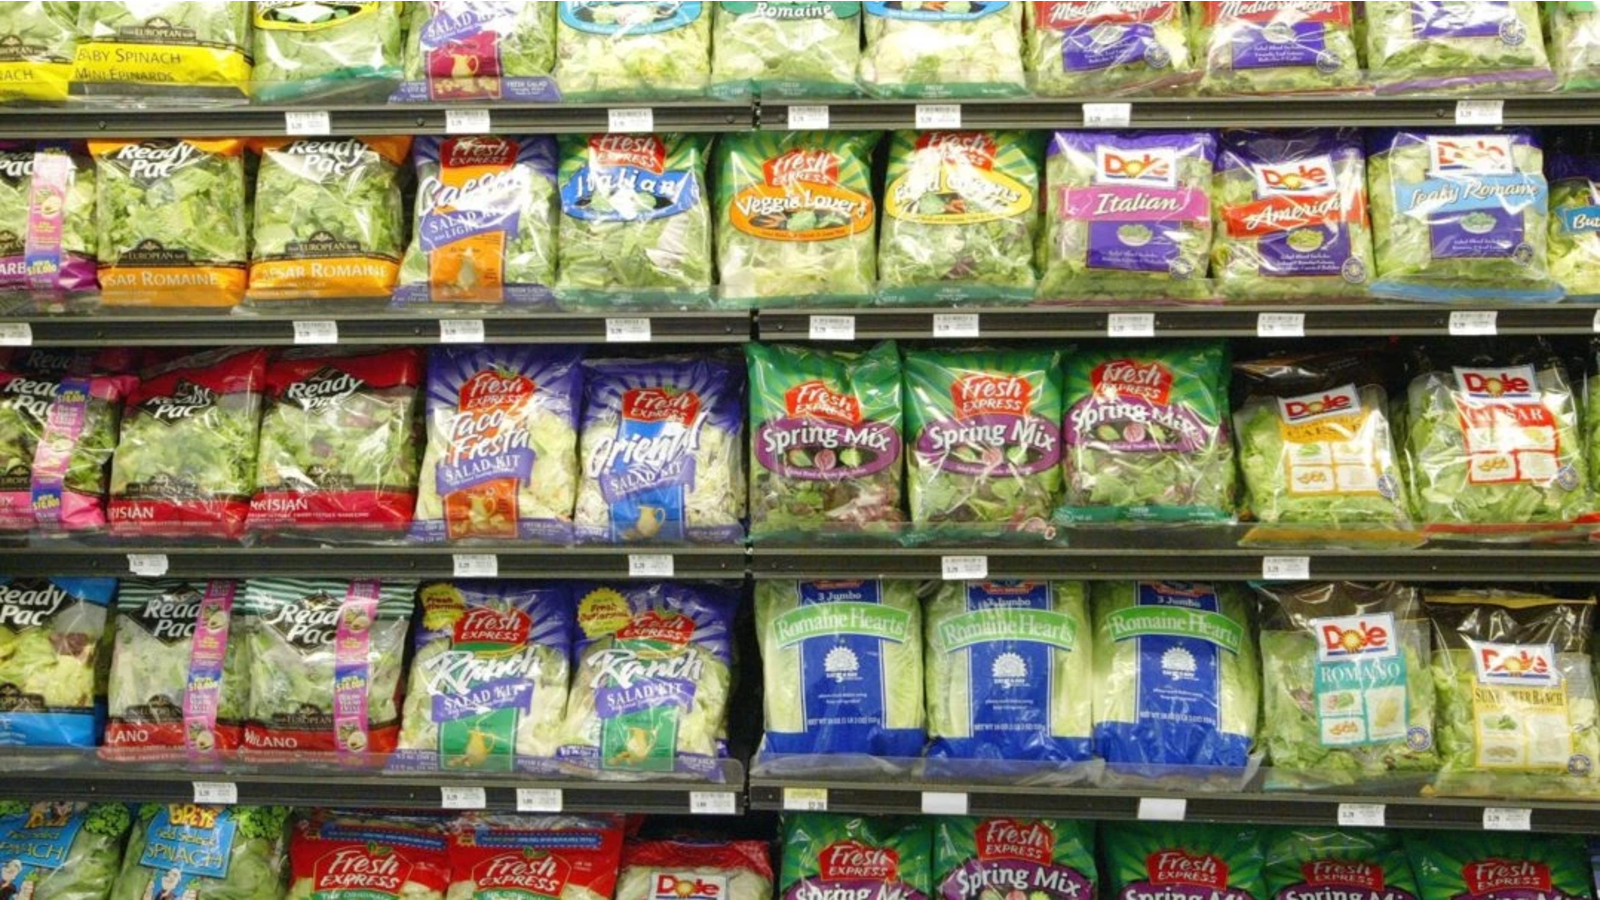 FDA investigates multistate outbreak of Listeria linked to Dole packaged salad